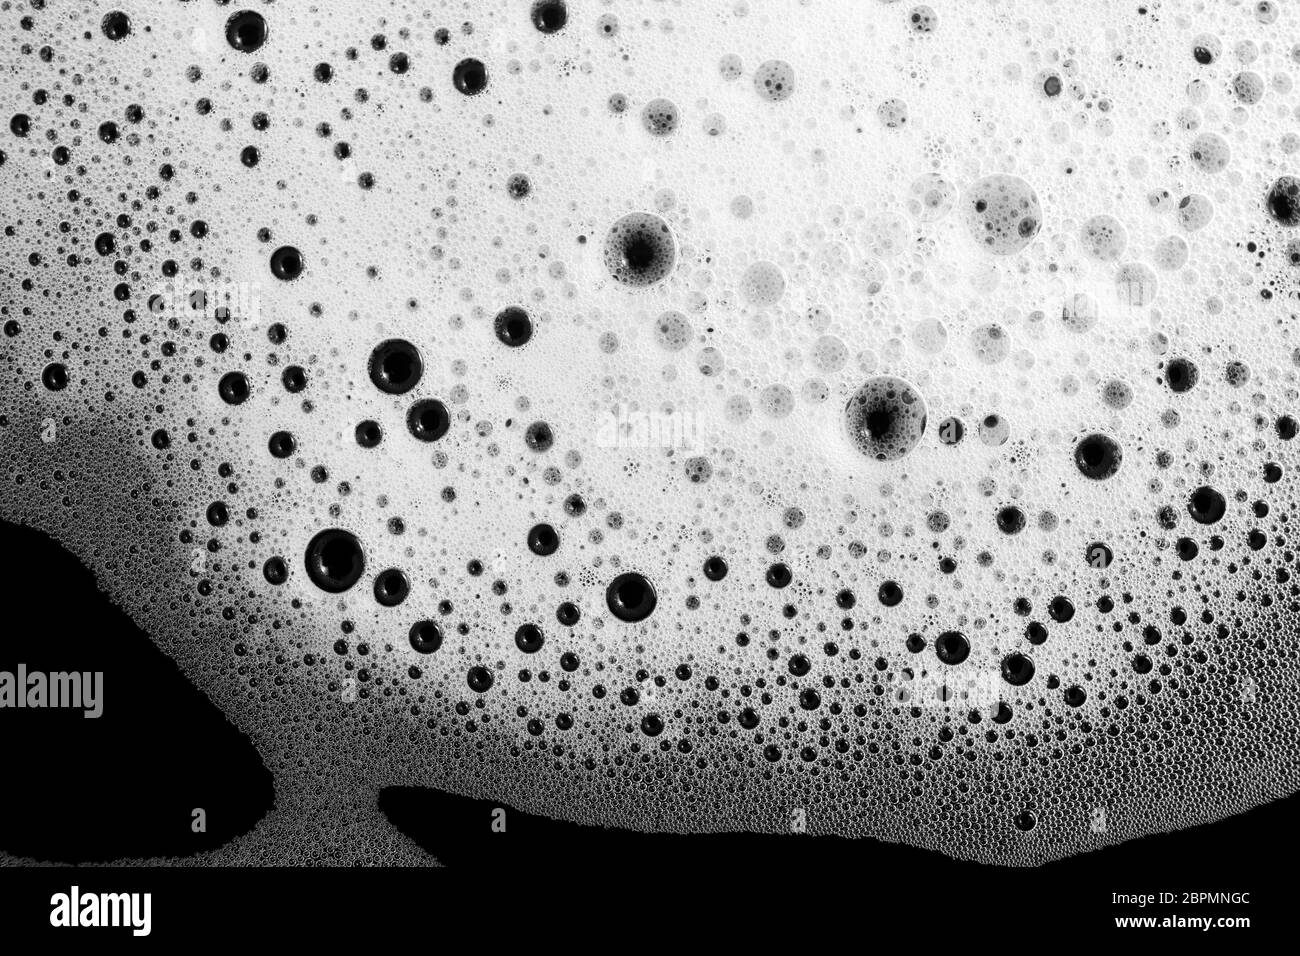 Detergent foam background. Soap foam with bubbles on black. Flat lay. Stock Photo